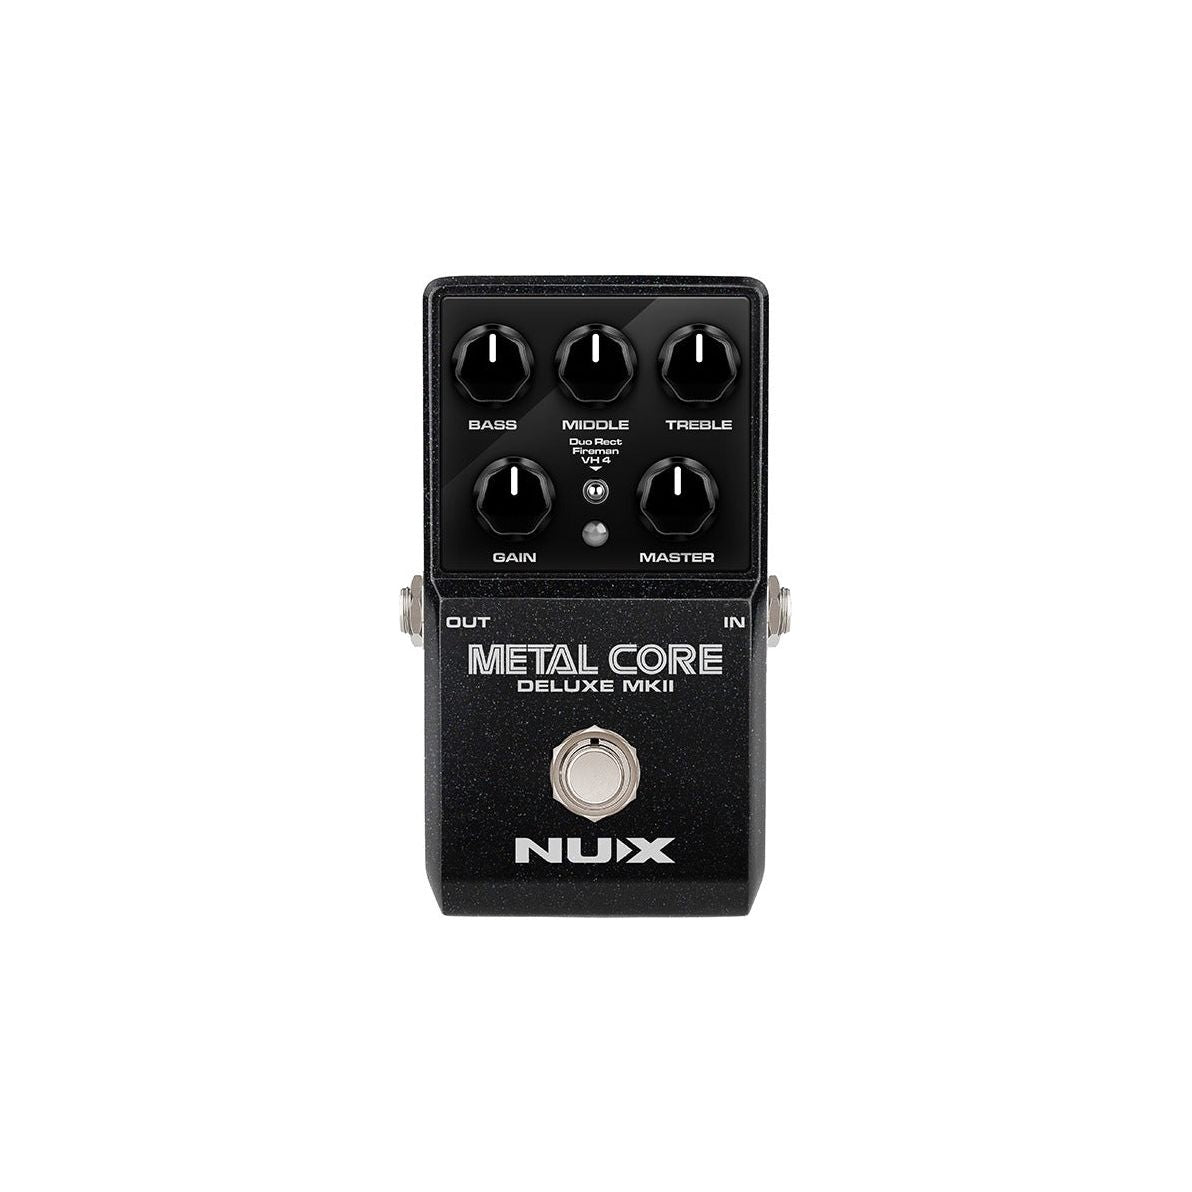 NUX Core Series Metal Core Deluxe MK-II Distortion Effects & Preamp Pedal